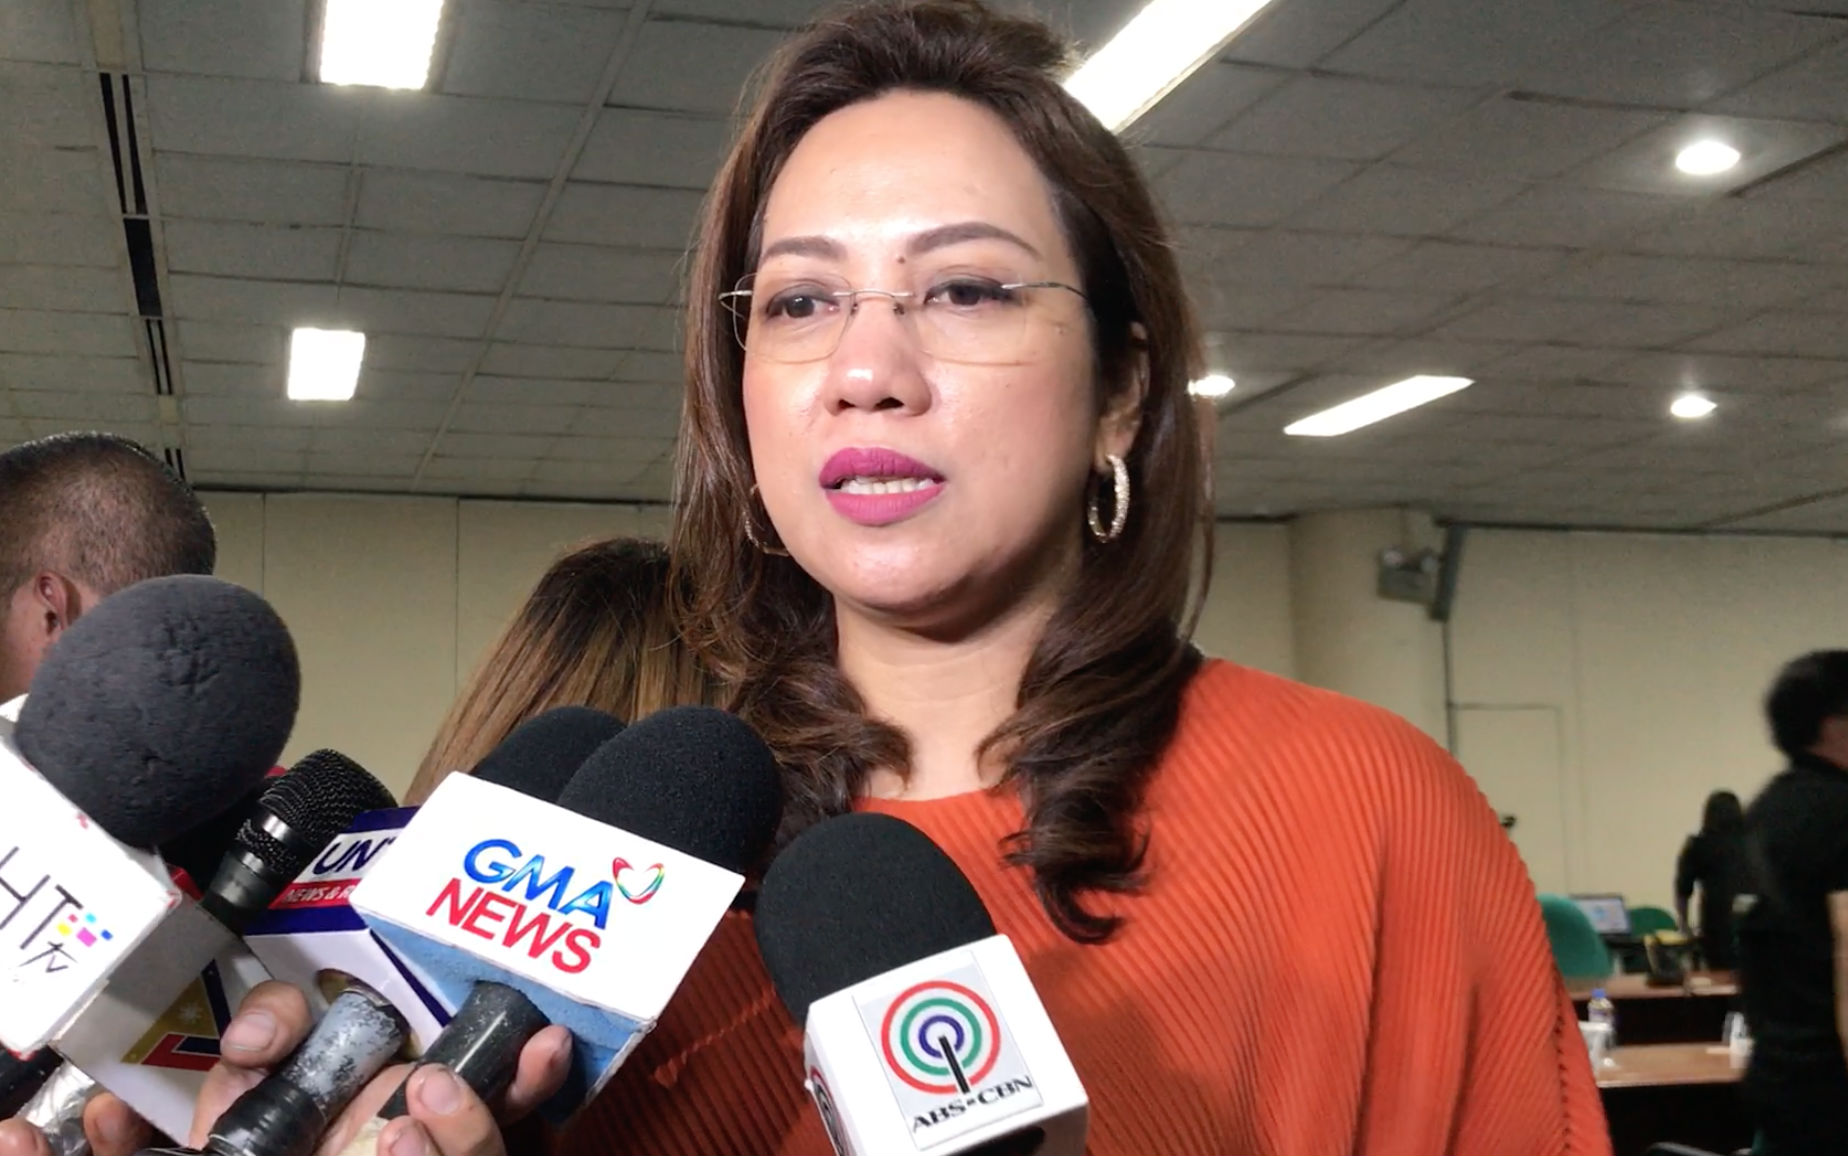 Garin, 19 others indicted over Dengvaxia